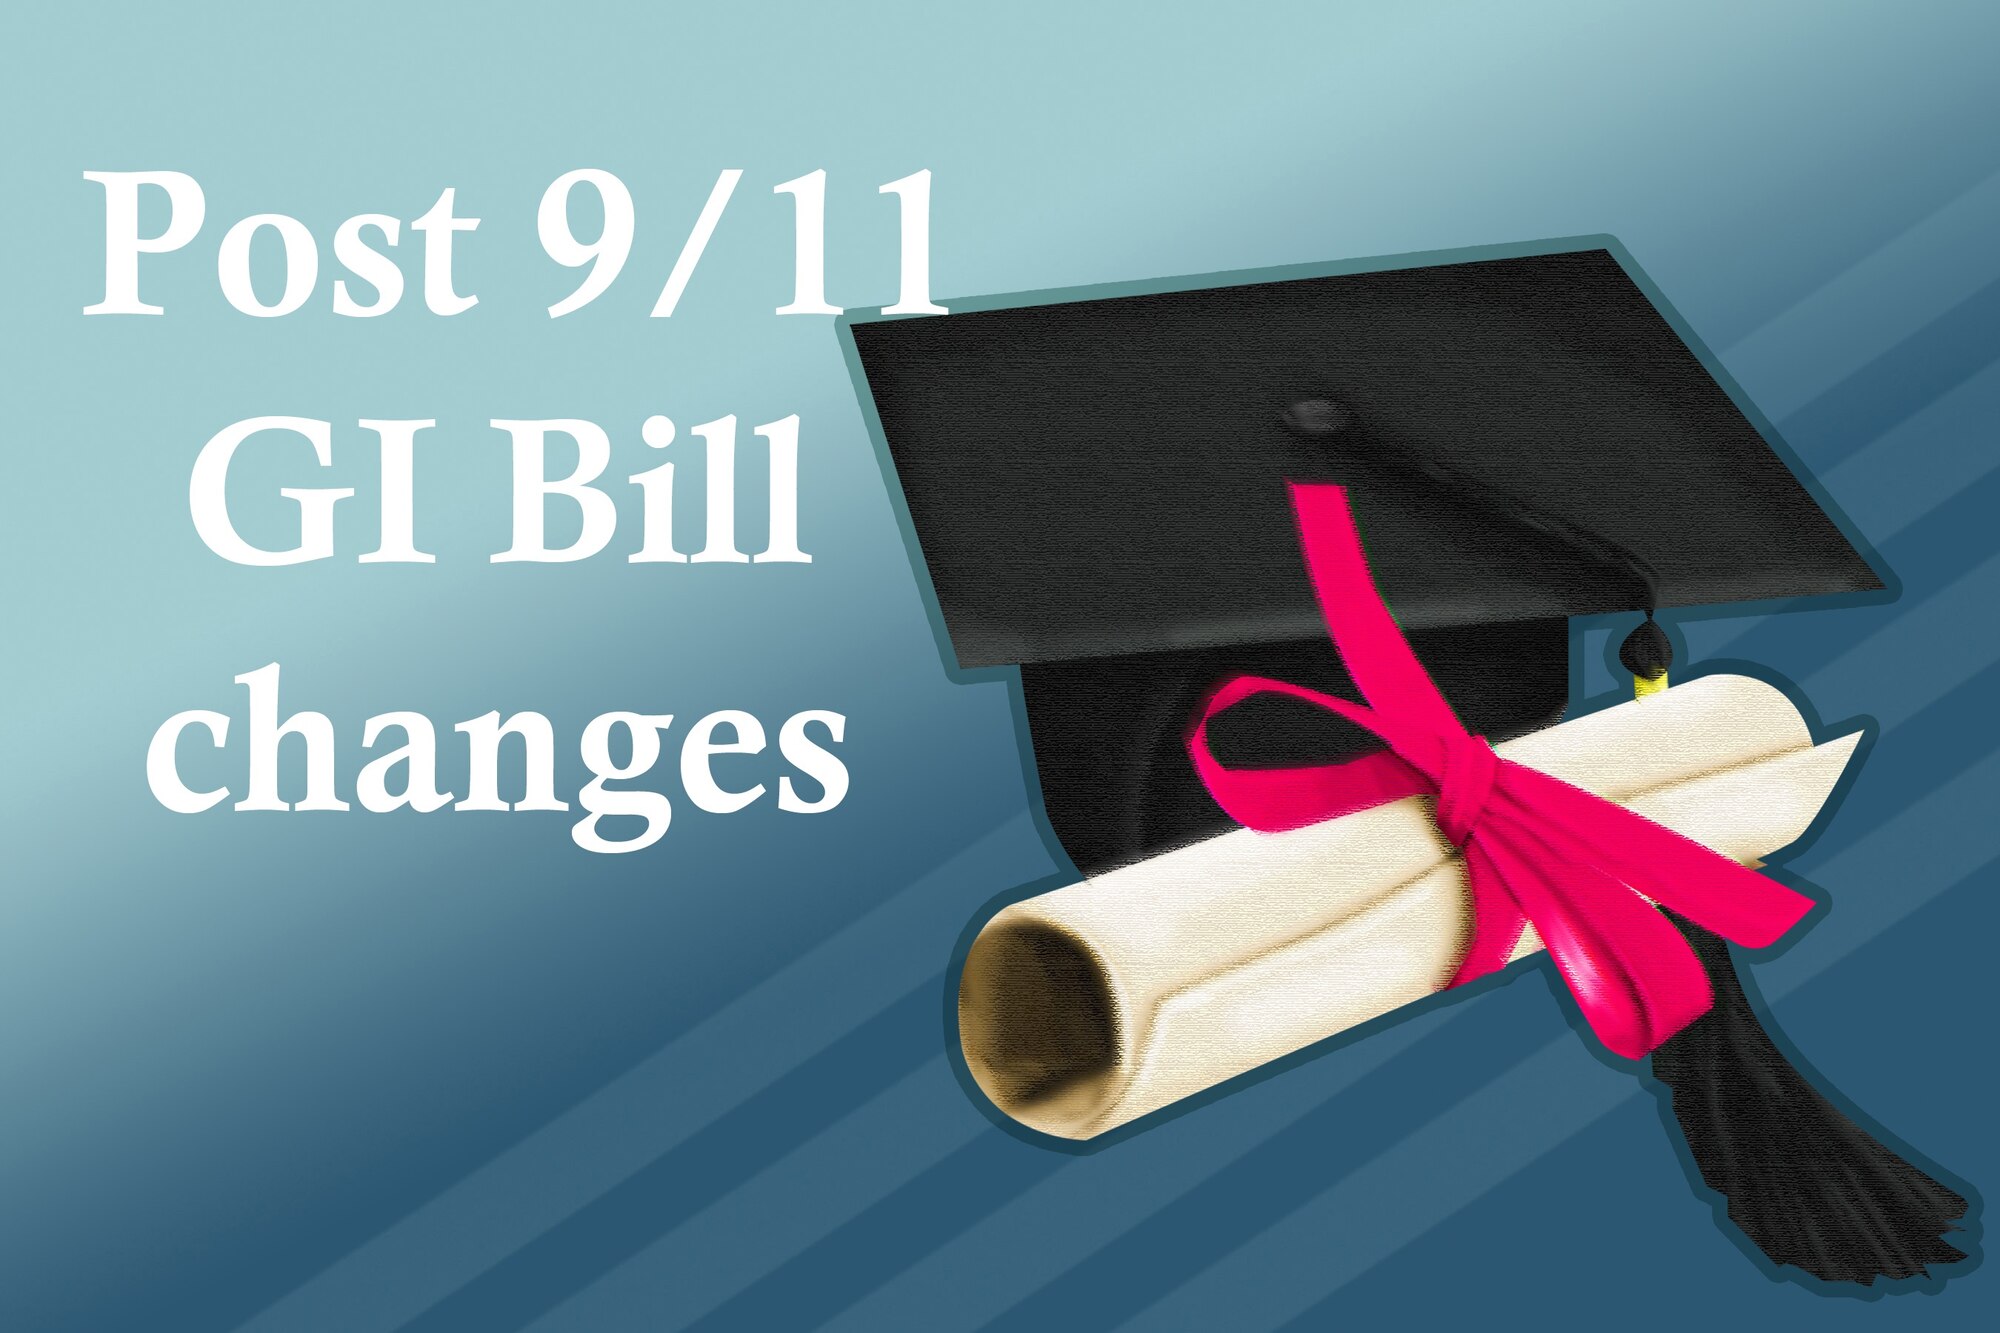 The Department of Defense delayed an issued change in policy regarding service members transferring their Post-9/11 GI Bill educational benefits. Implementation has been delayed until January 12, 2020, giving long-serving members more time to transfer their education benefits to spouses or dependents.